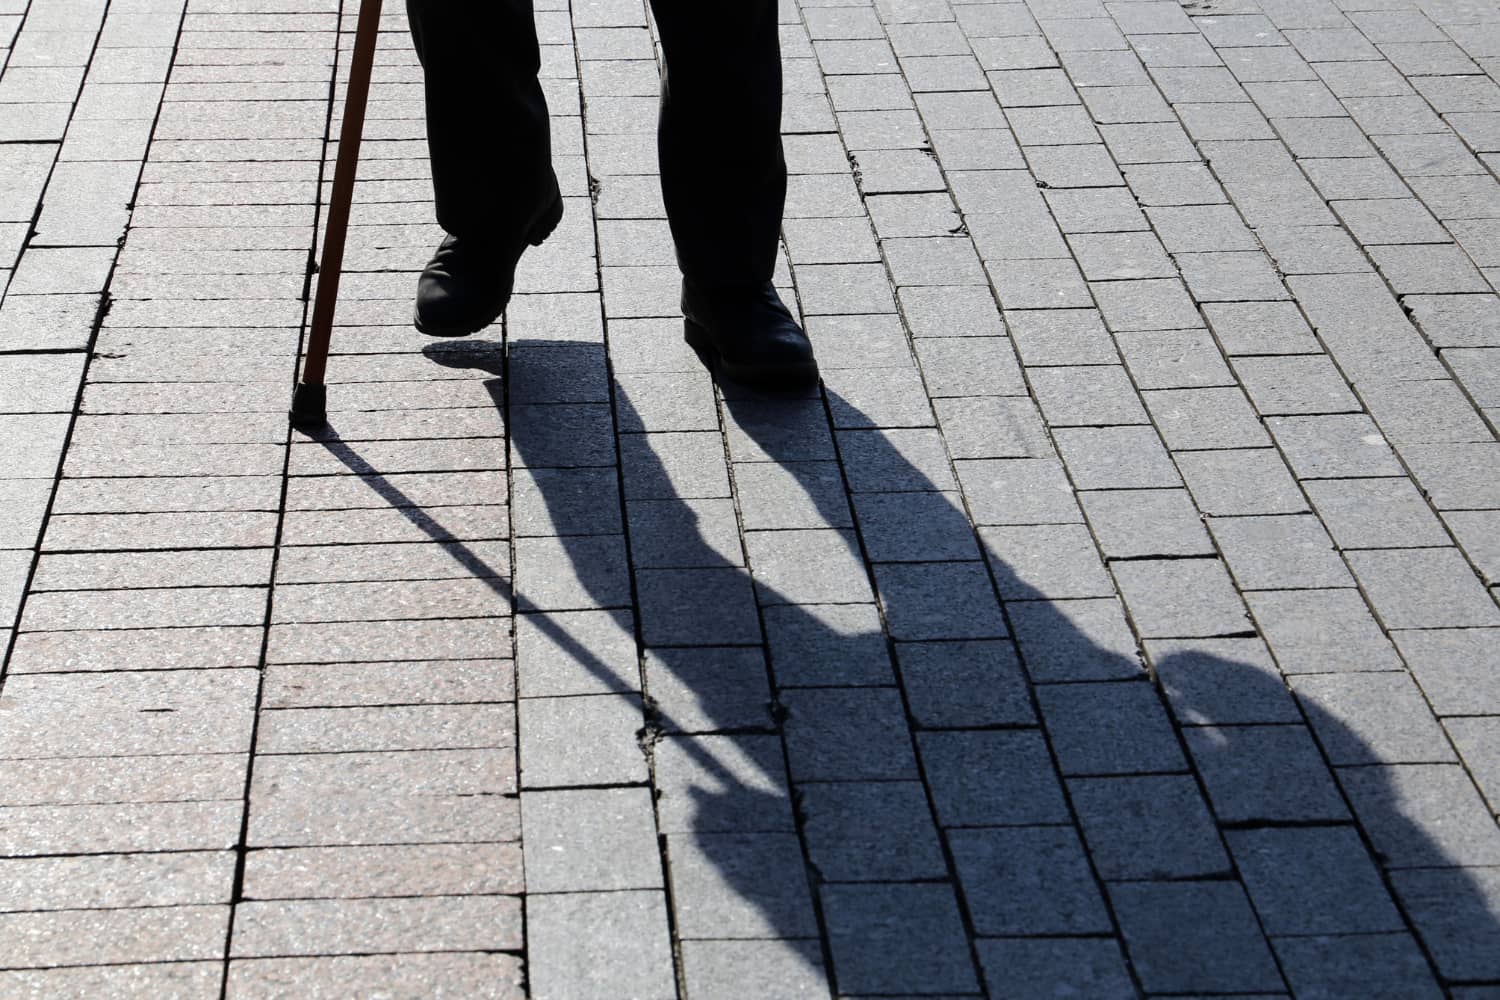 The shadow of an old man with a walking stick on the pavements